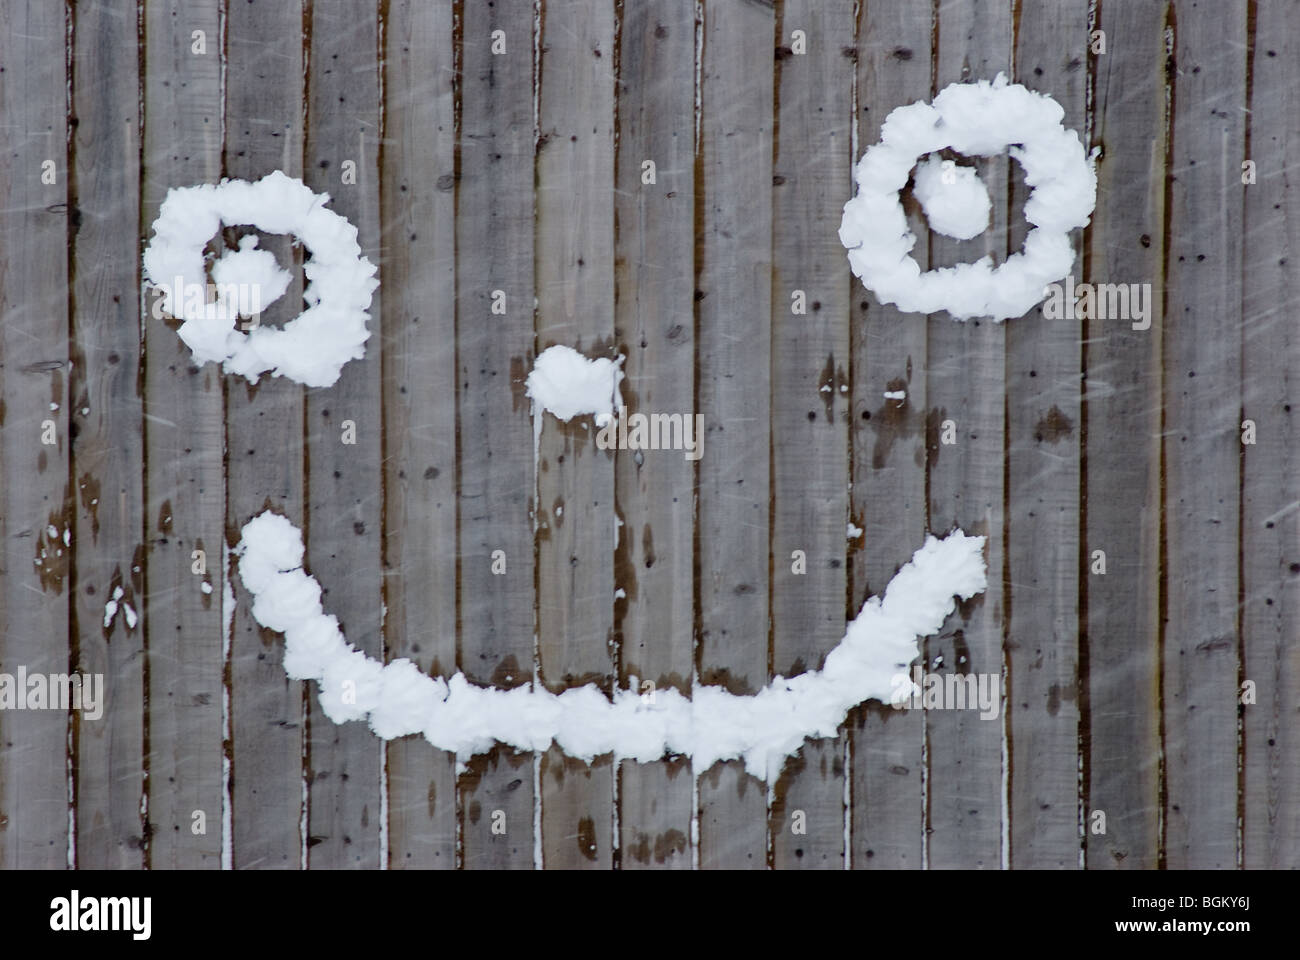 Smiley face made out of snowballs Stock Photo